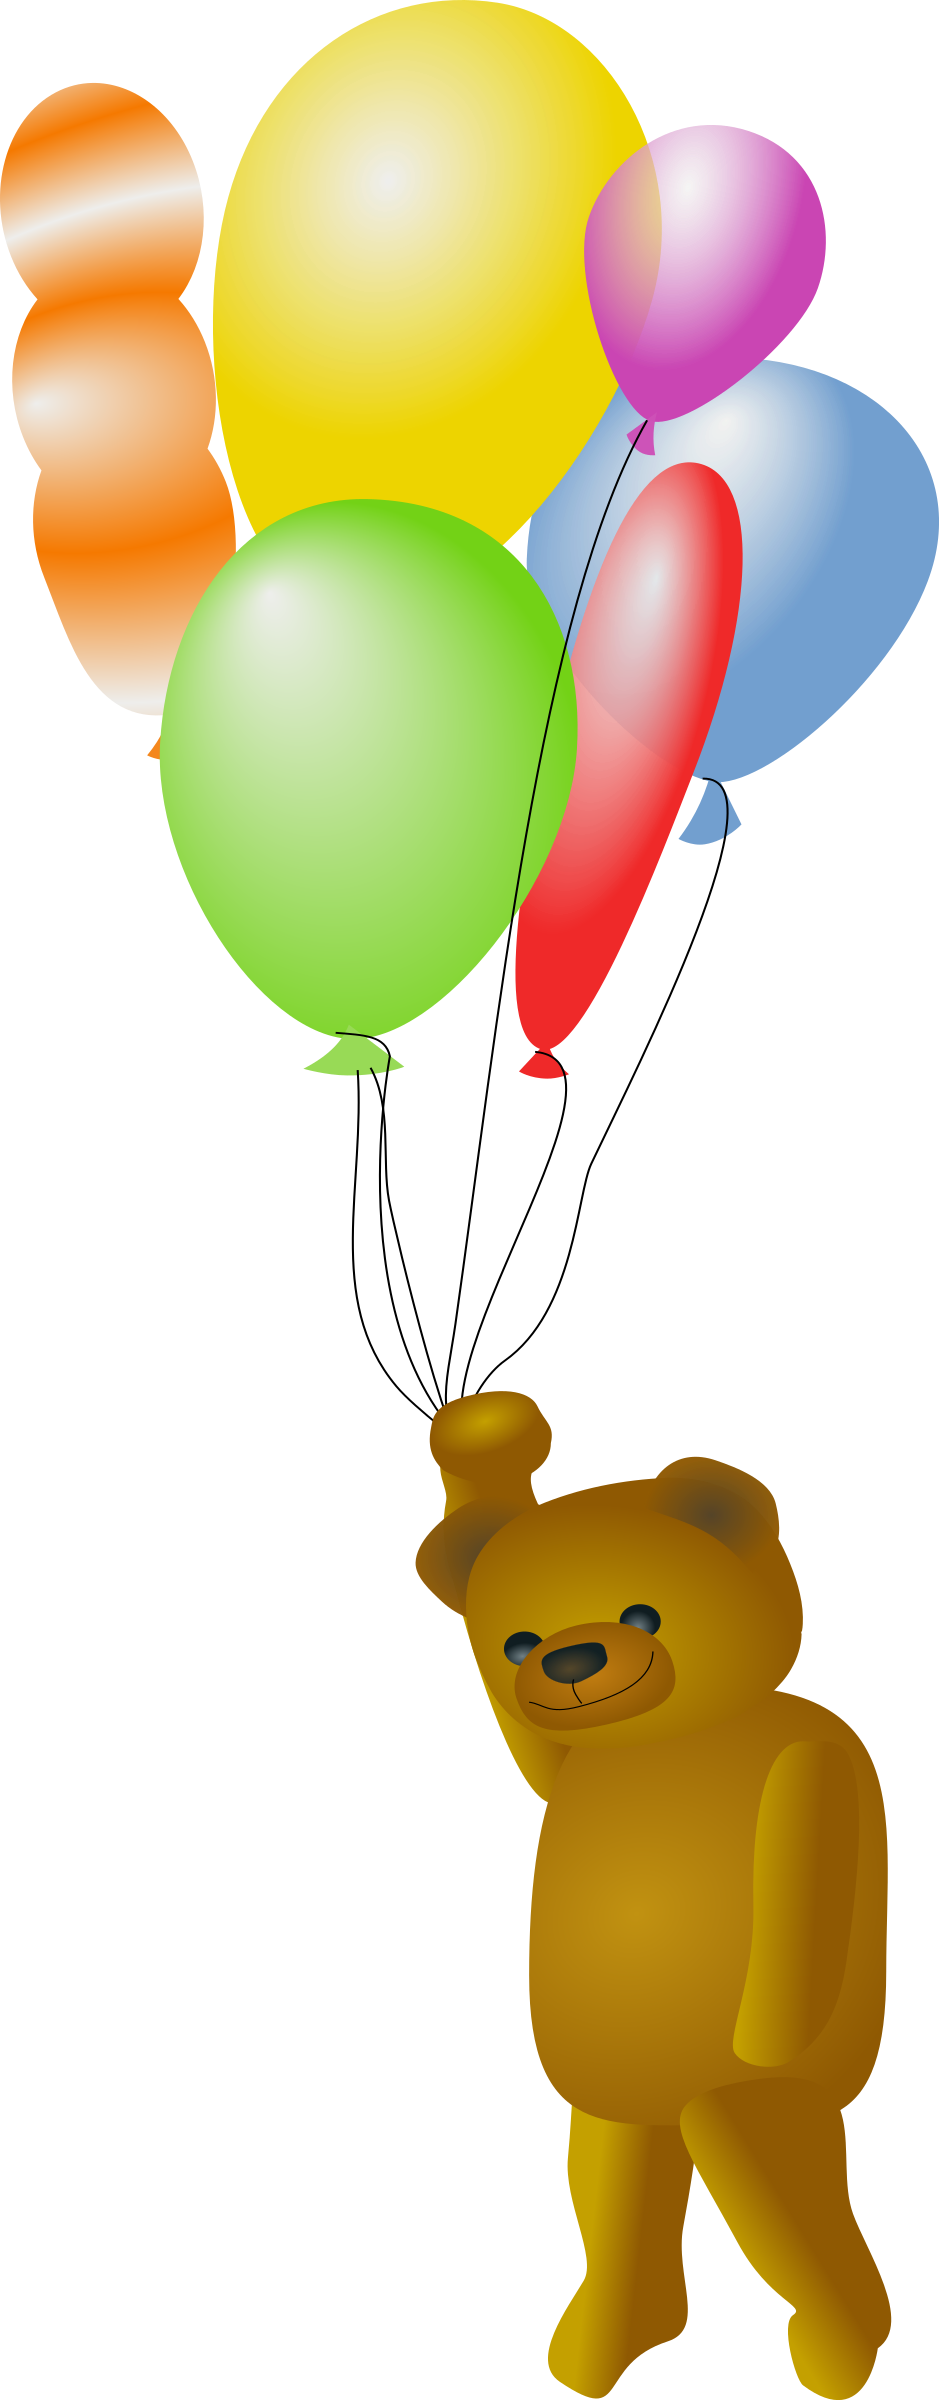 Teddy Bear with Balloons PNG icon